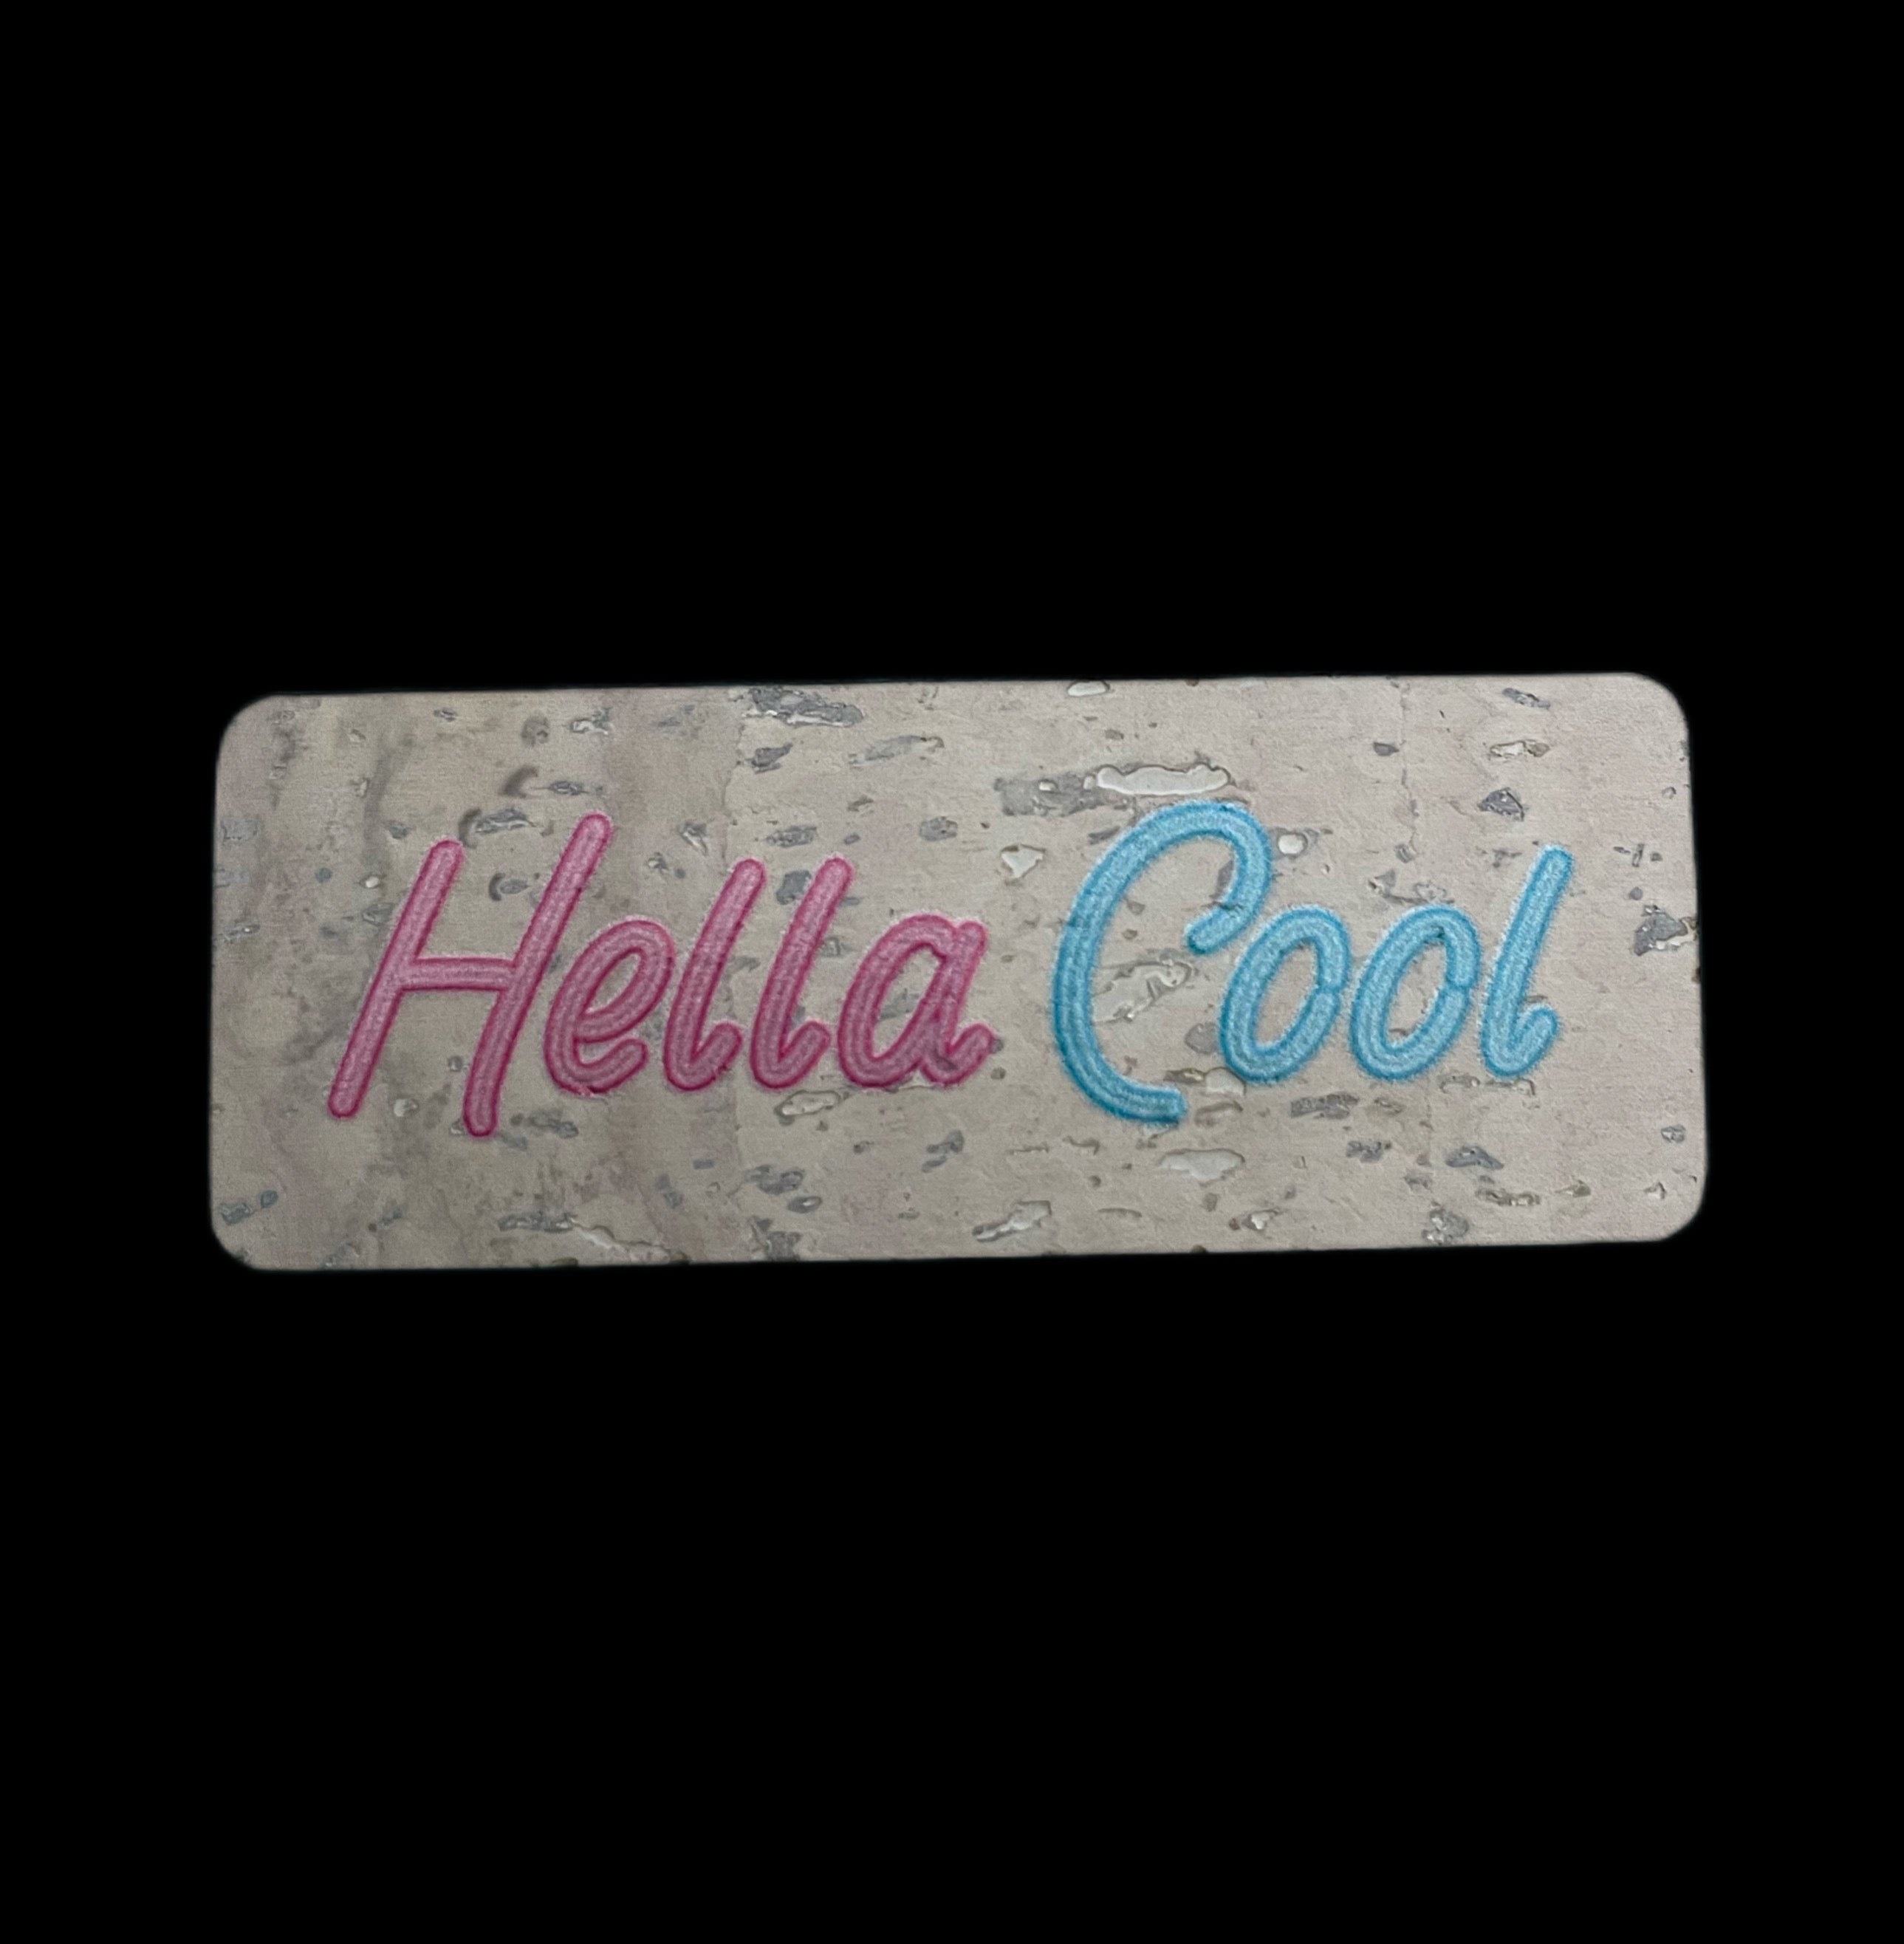 Hella Cool Bag Tags by Heartwood and Hide